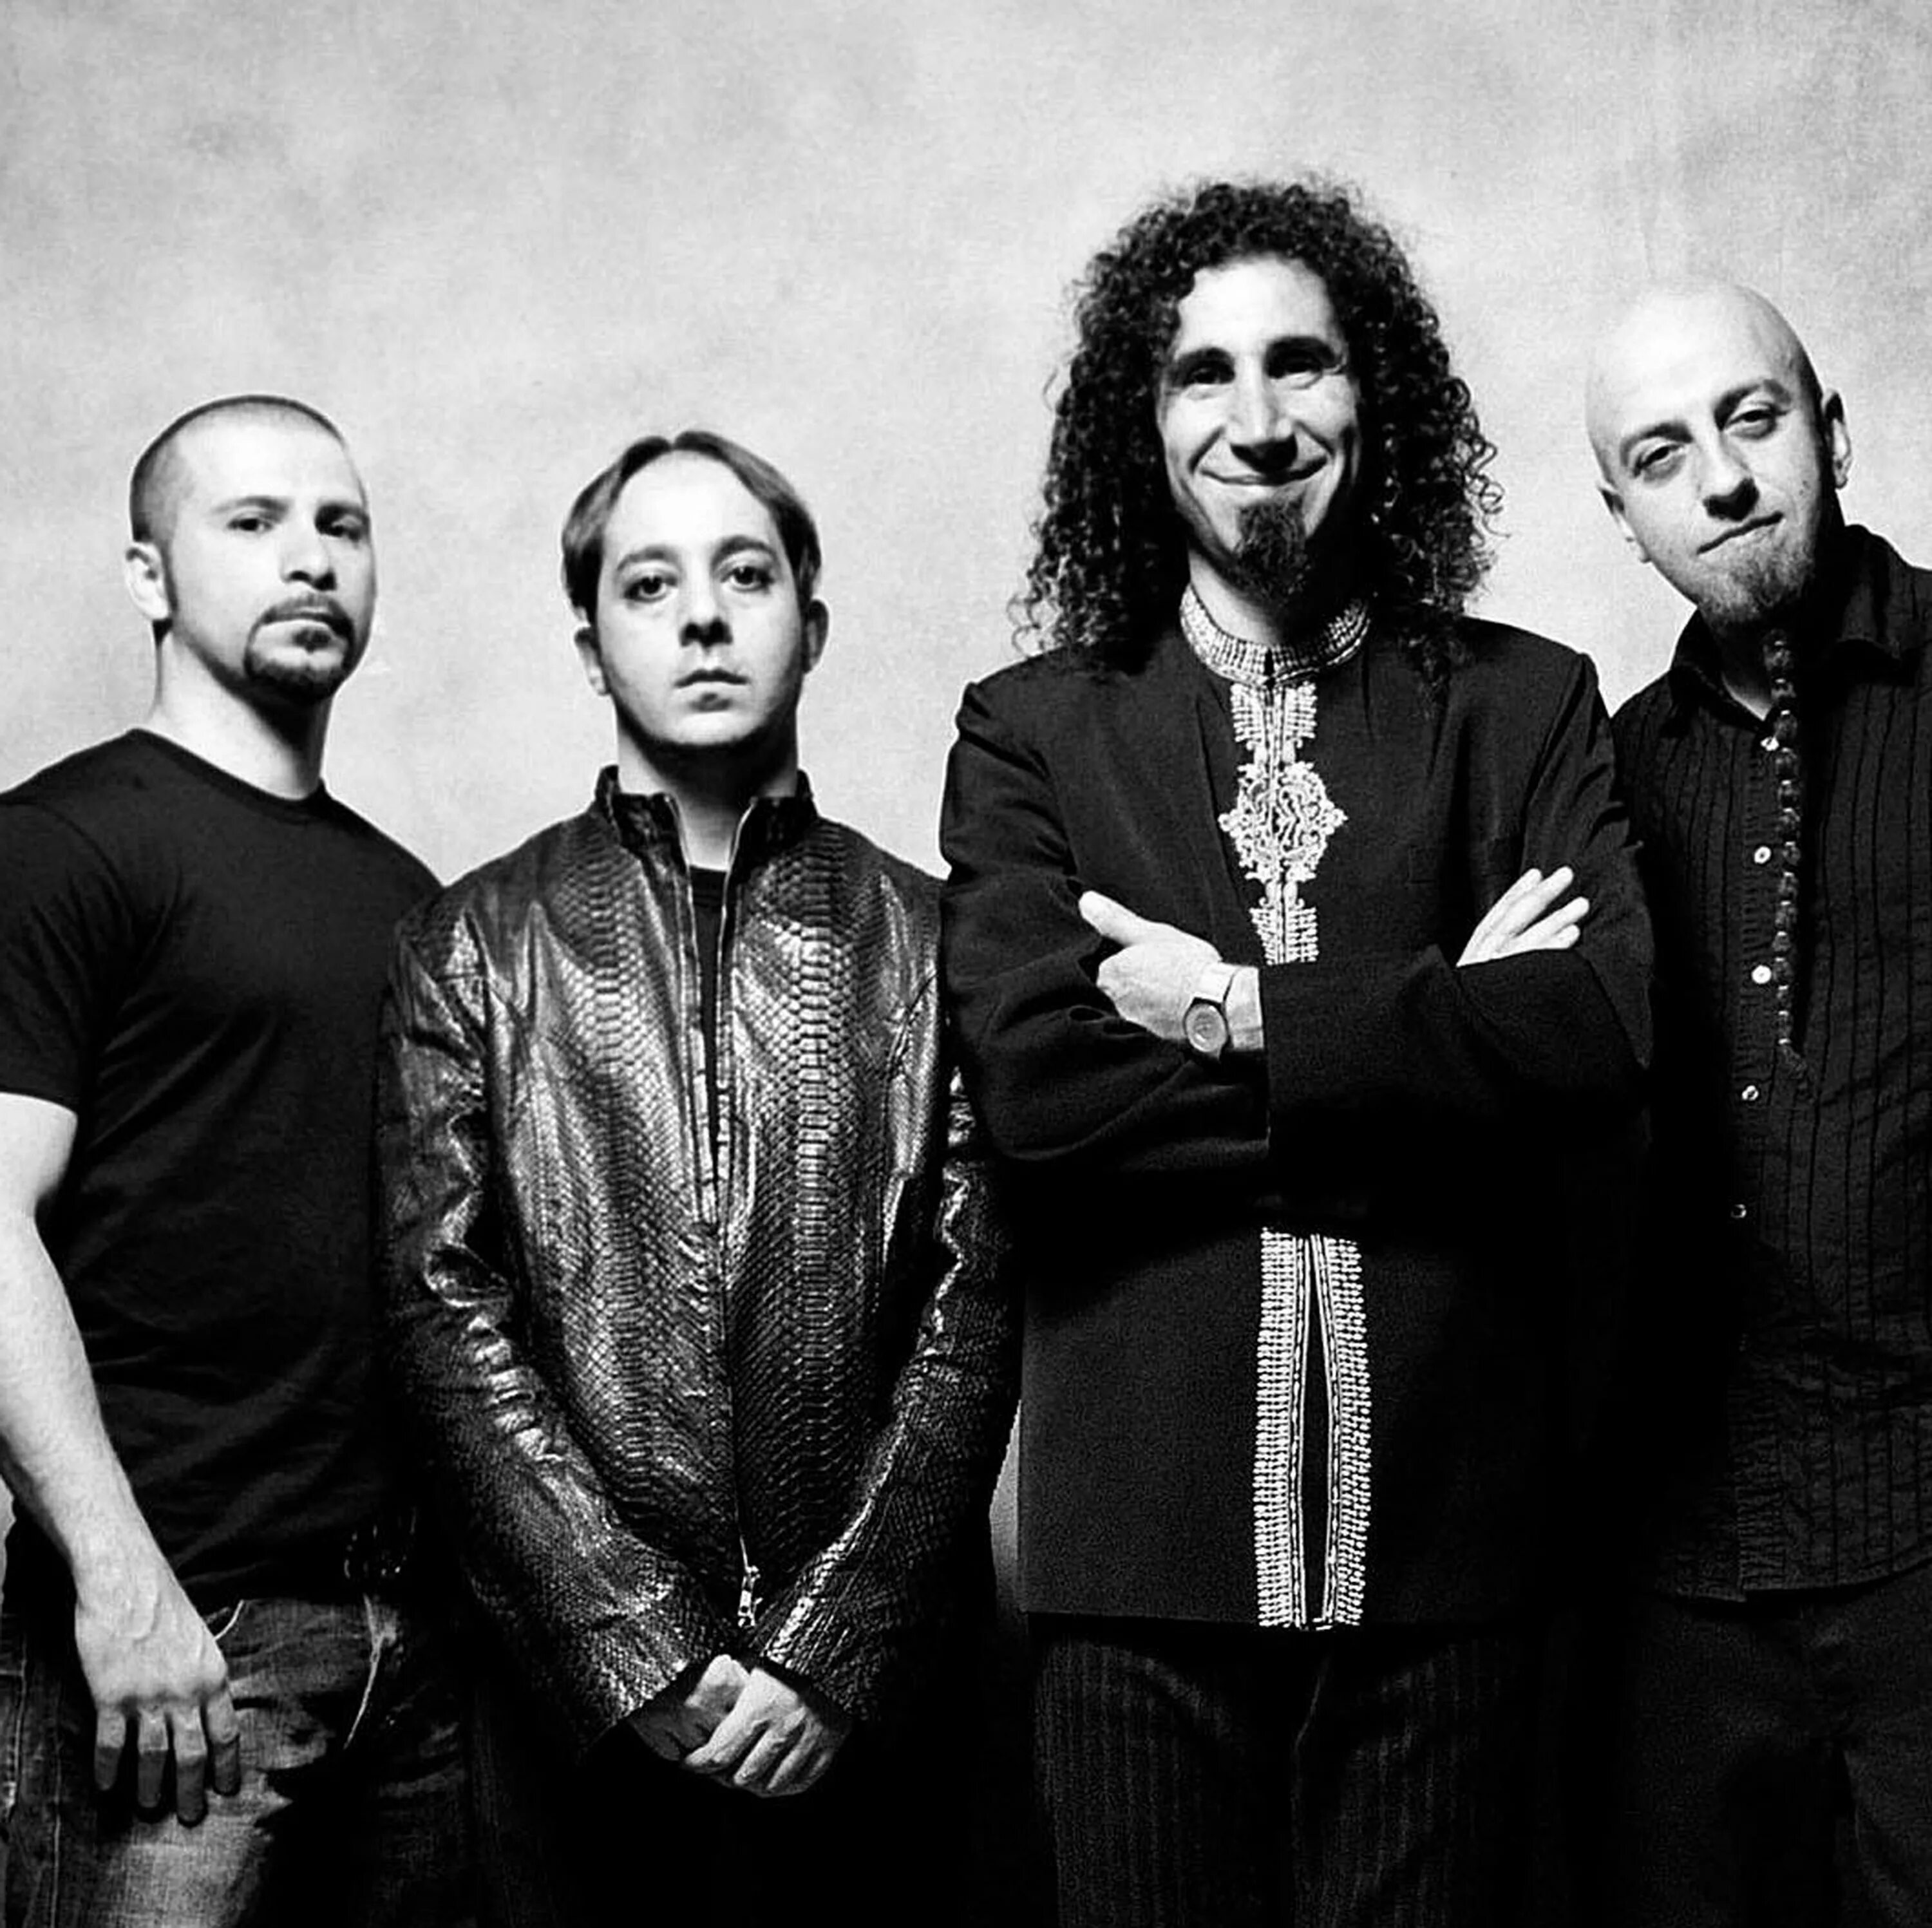 System of a down. SOAD группа. System of a down состав группы. Группа System of a down 1998. Систем оф даунс